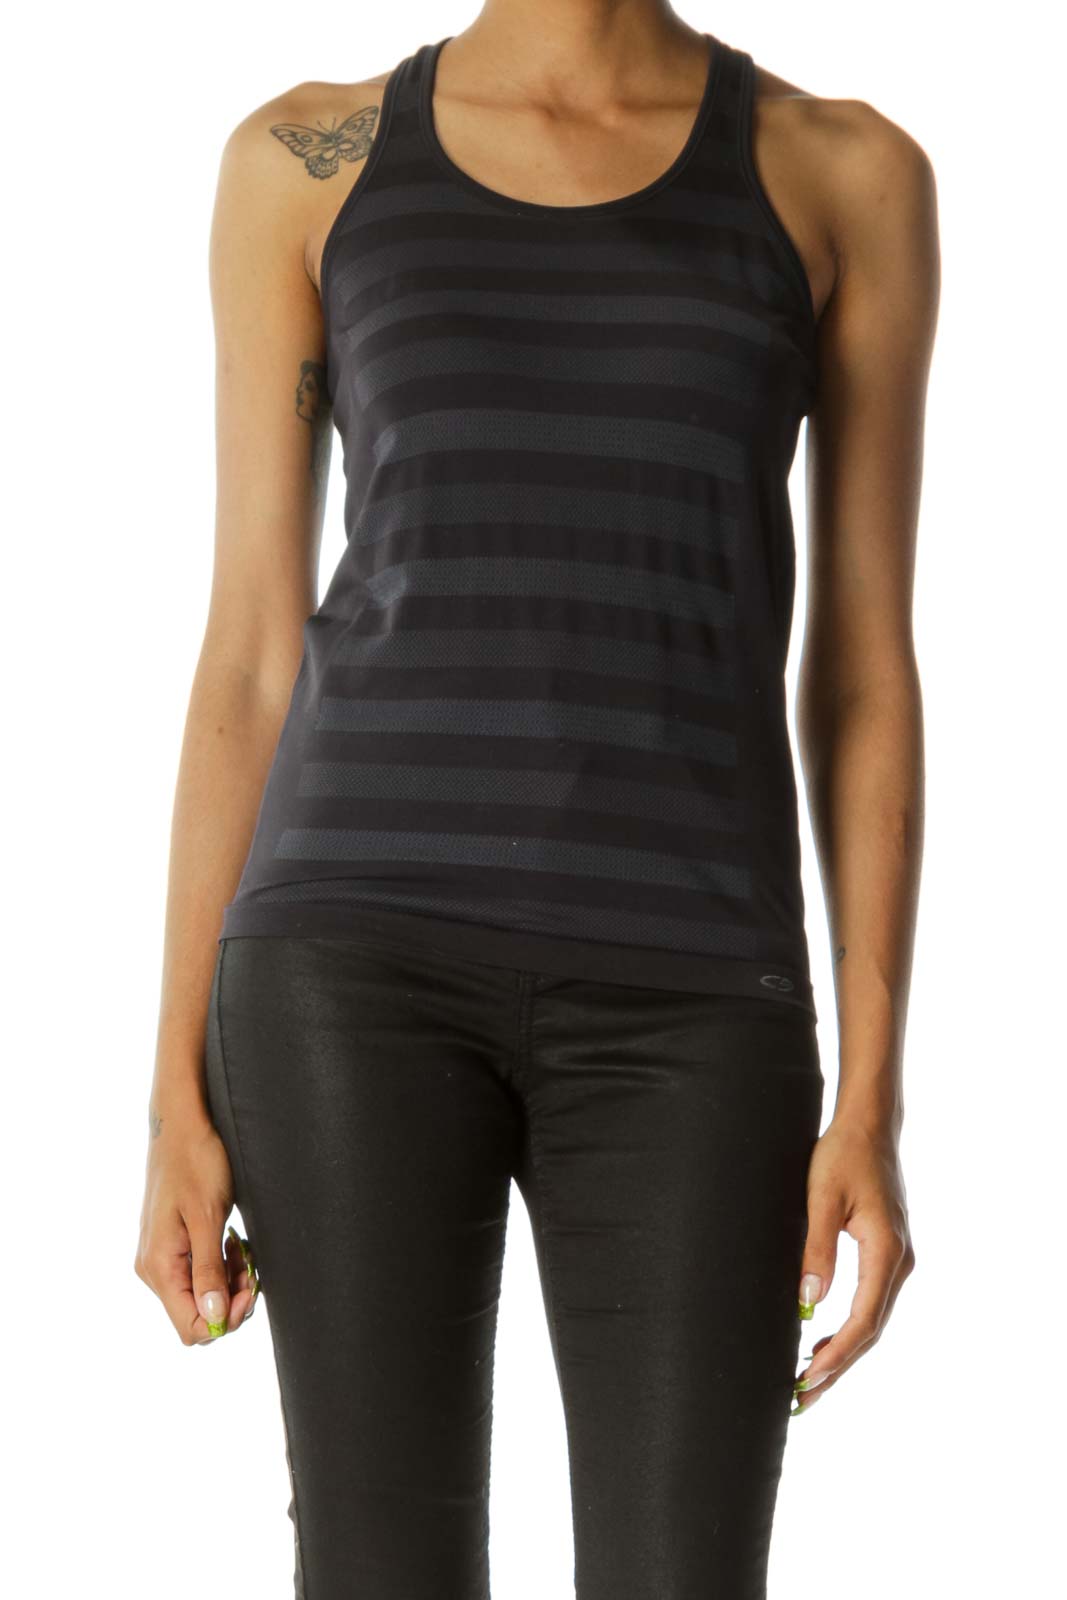 Black & Gray Thick-Striped Racer-Back Yoga Tank Front